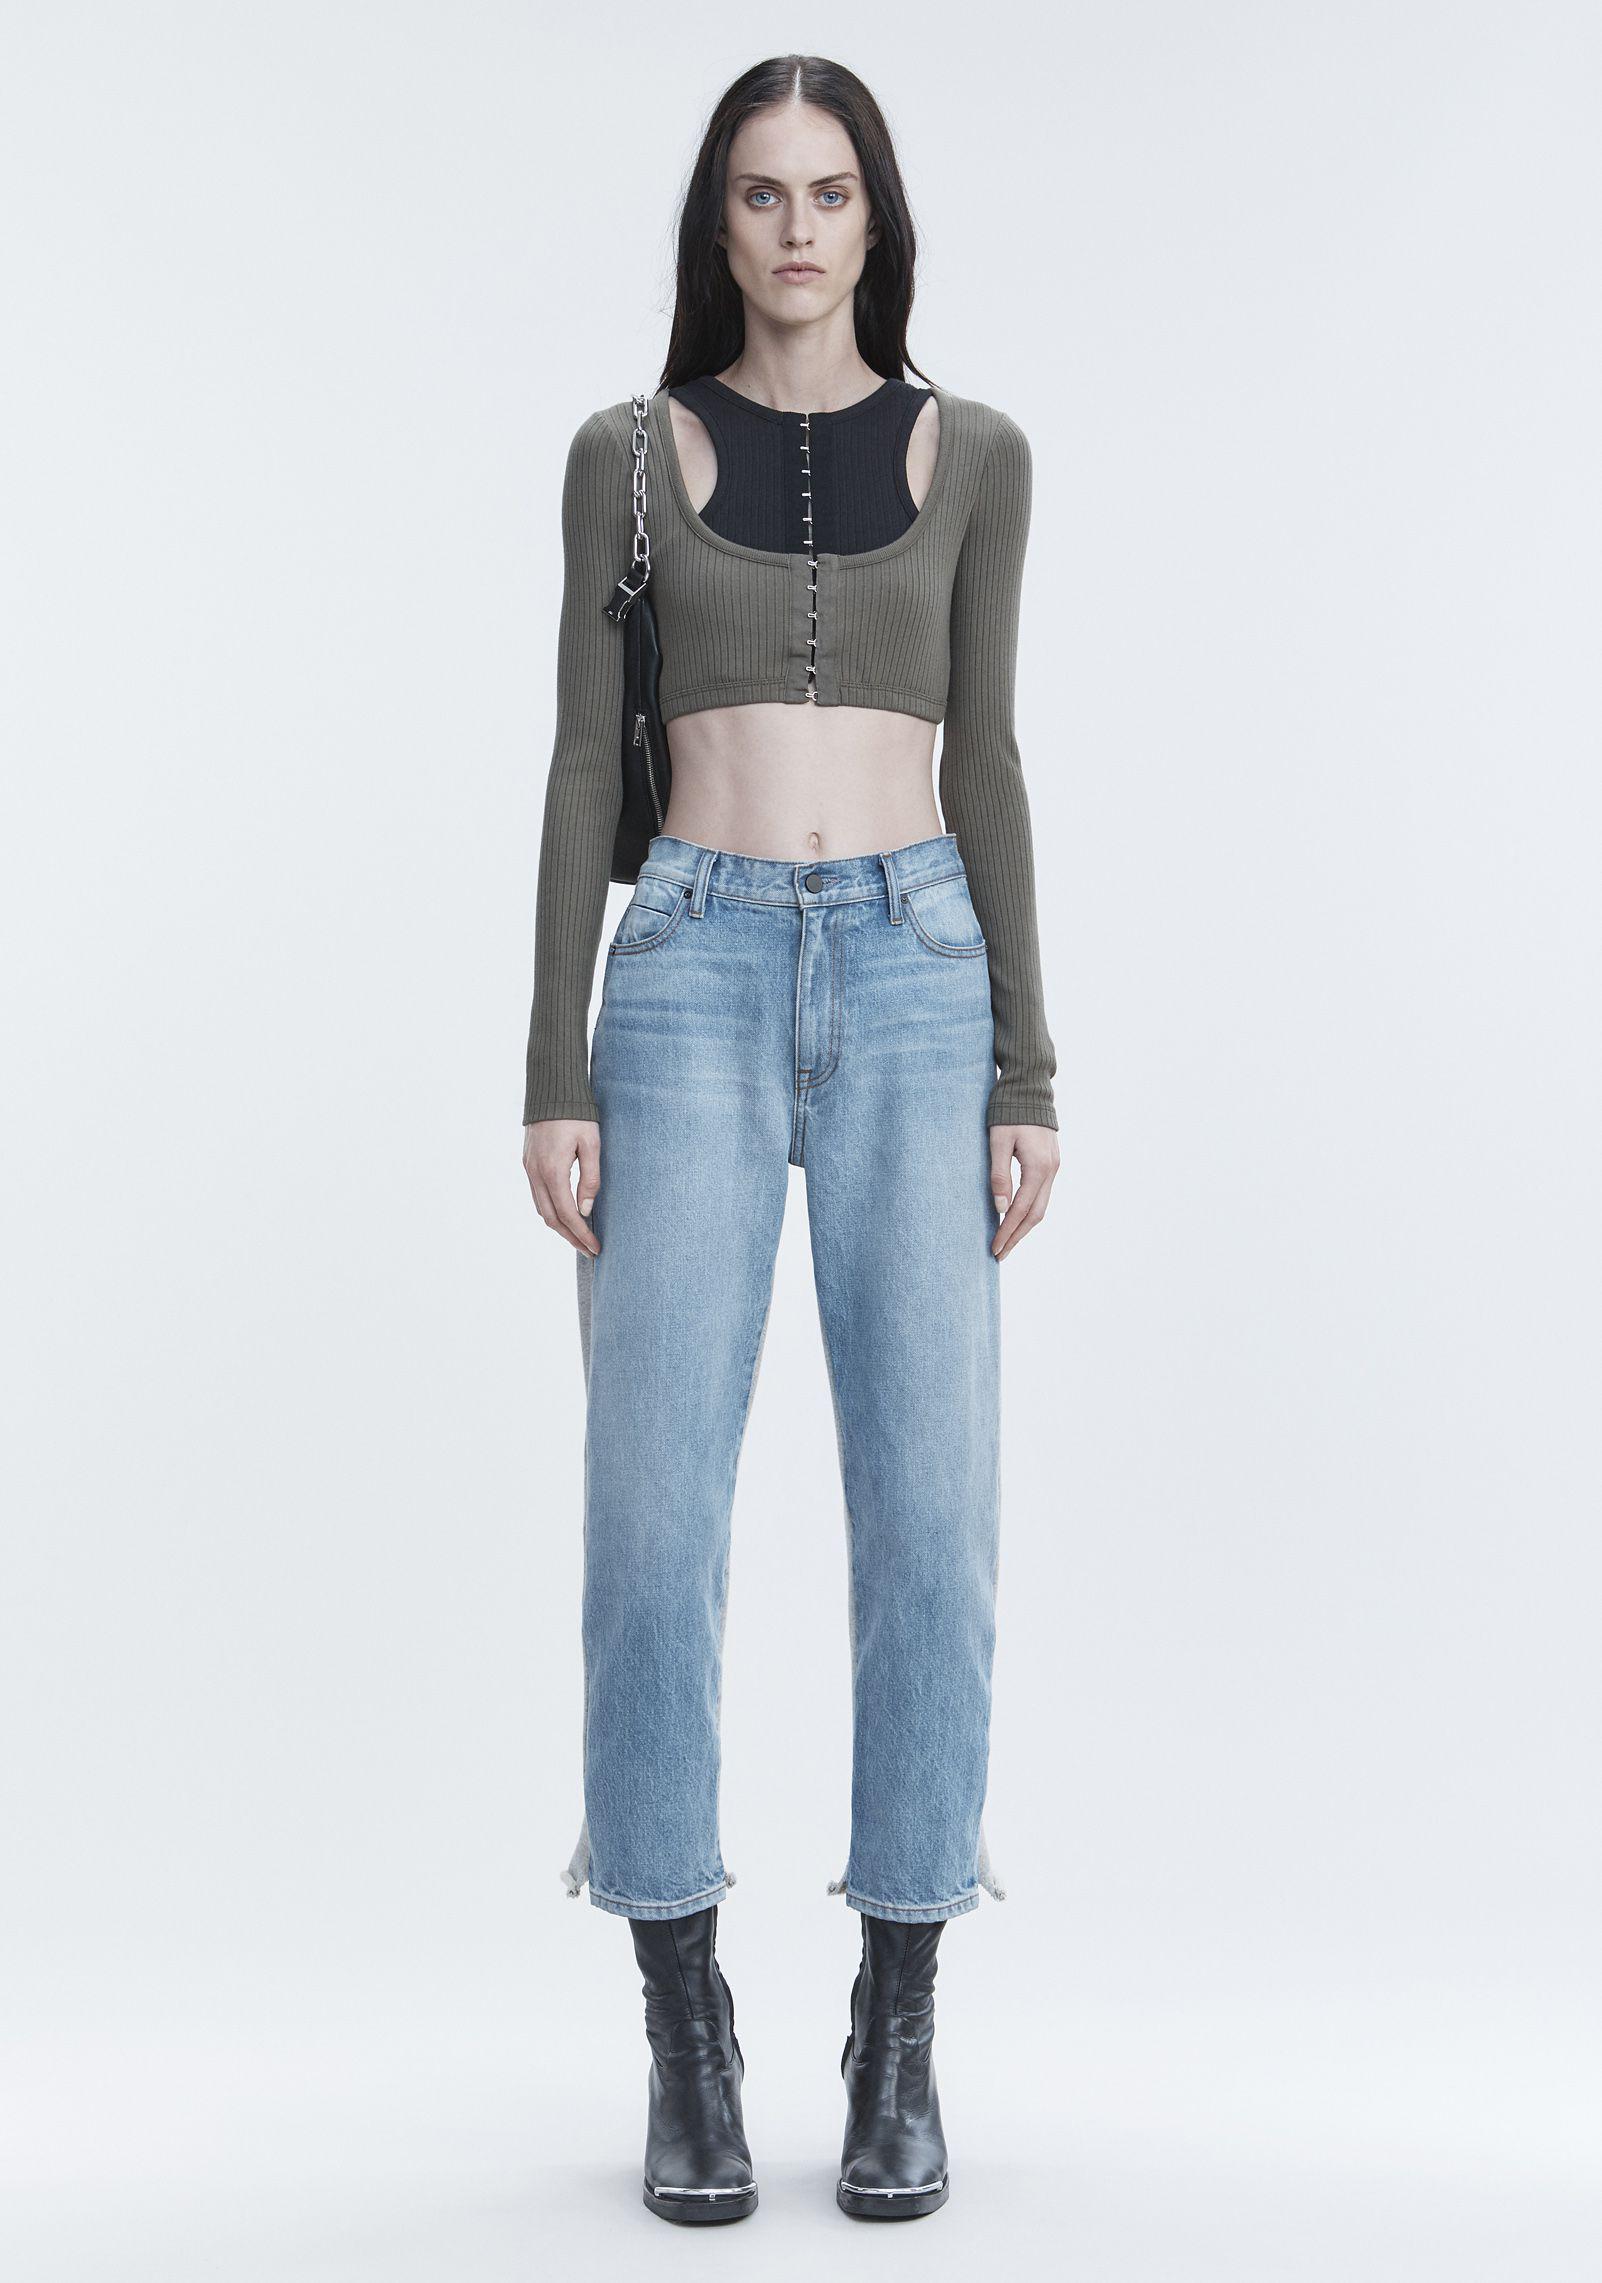 Lyst - T By Alexander Wang Long Sleeve Ribbed Crop Top in Green